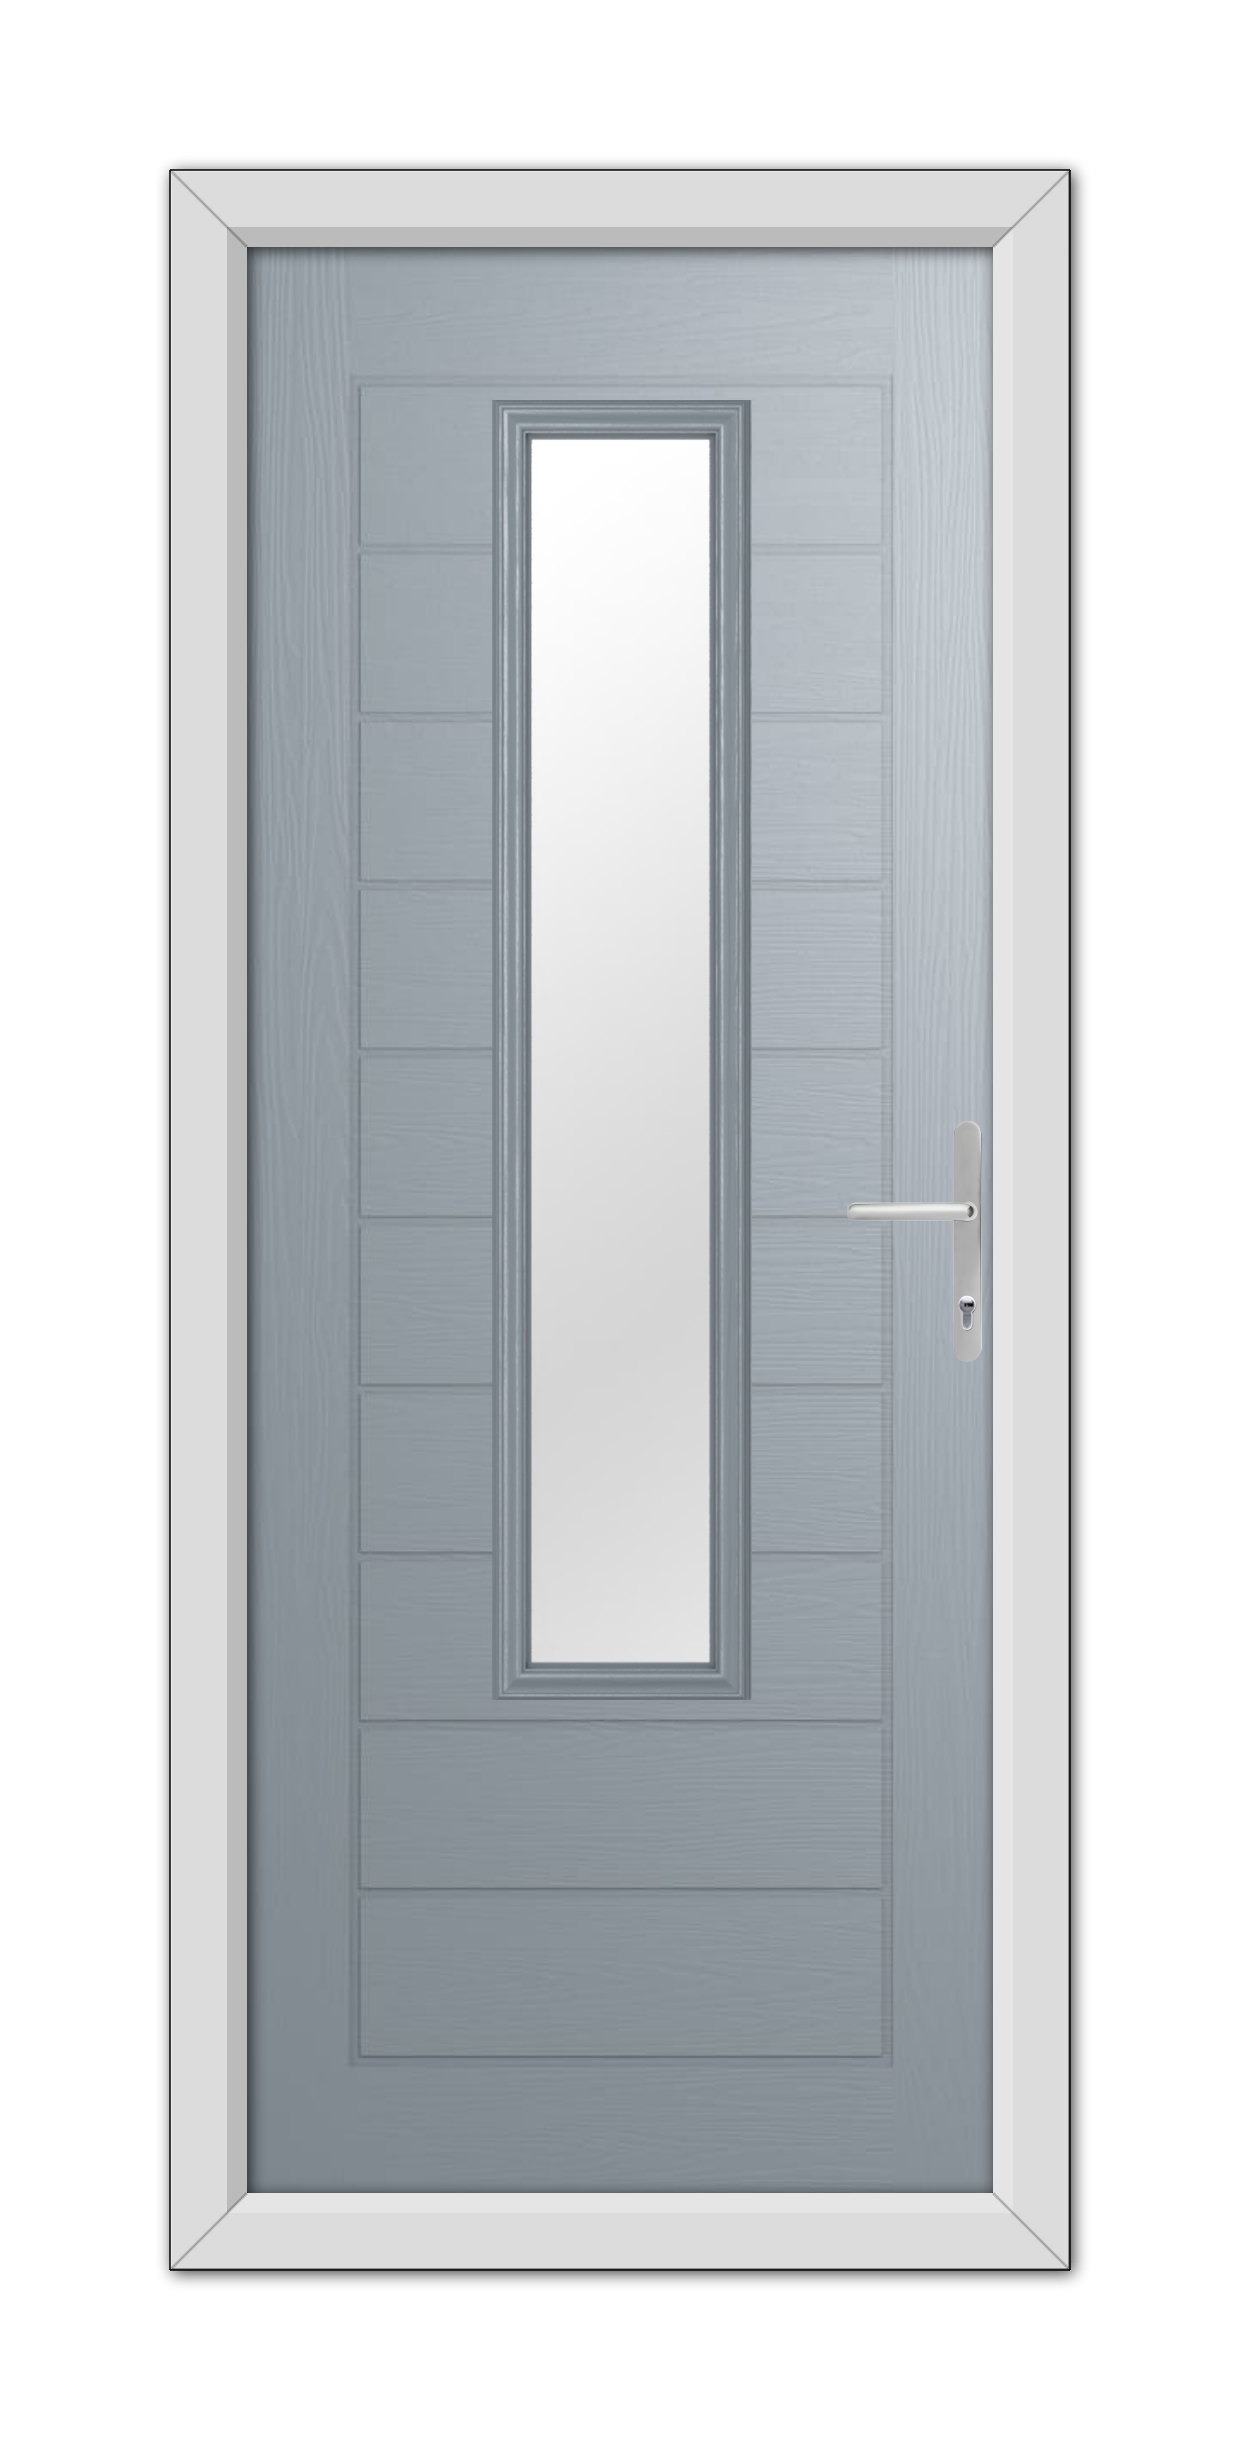 A modern French Grey Bedford Composite Door 48mm Timber Core with a vertical rectangular glass panel and a metal handle, set within a white door frame.